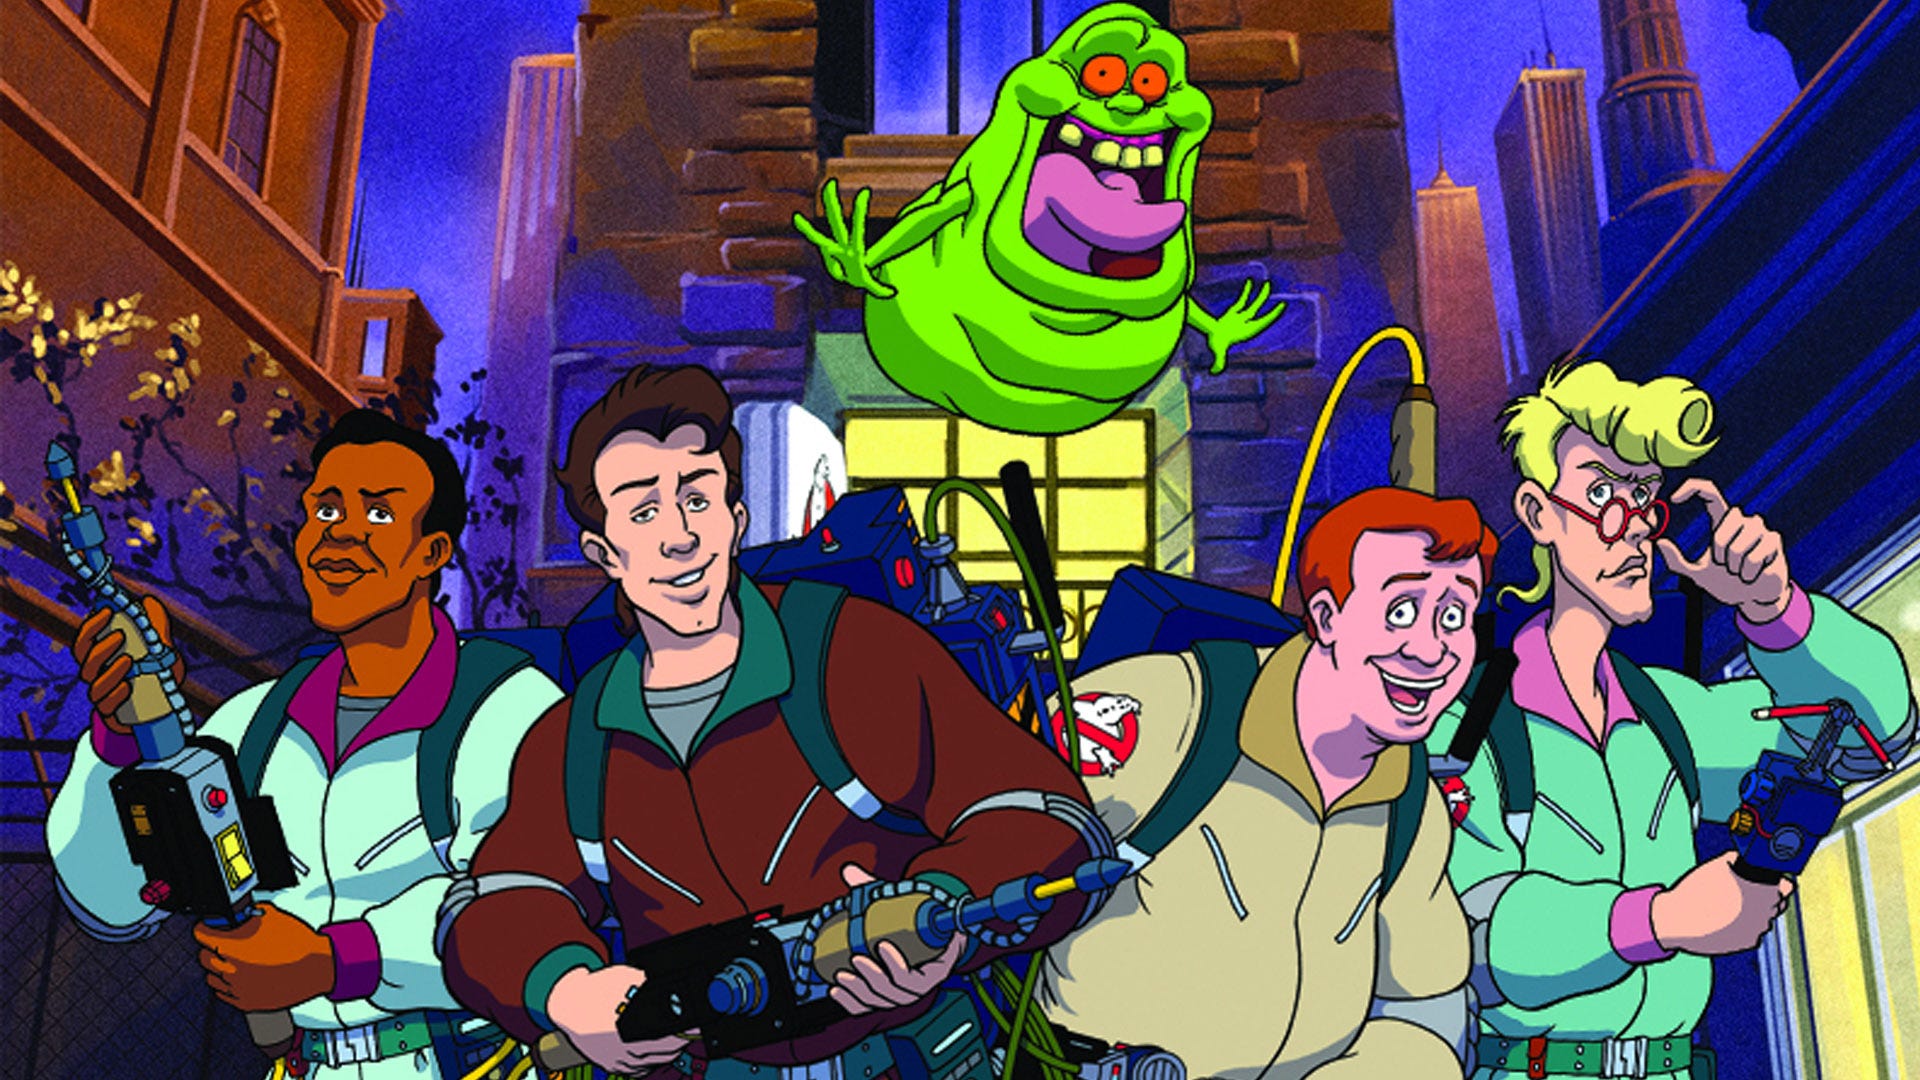 80s Traditional Comic strip ‘The Proper Ghostbusters’ Lands on YouTube (Legally)